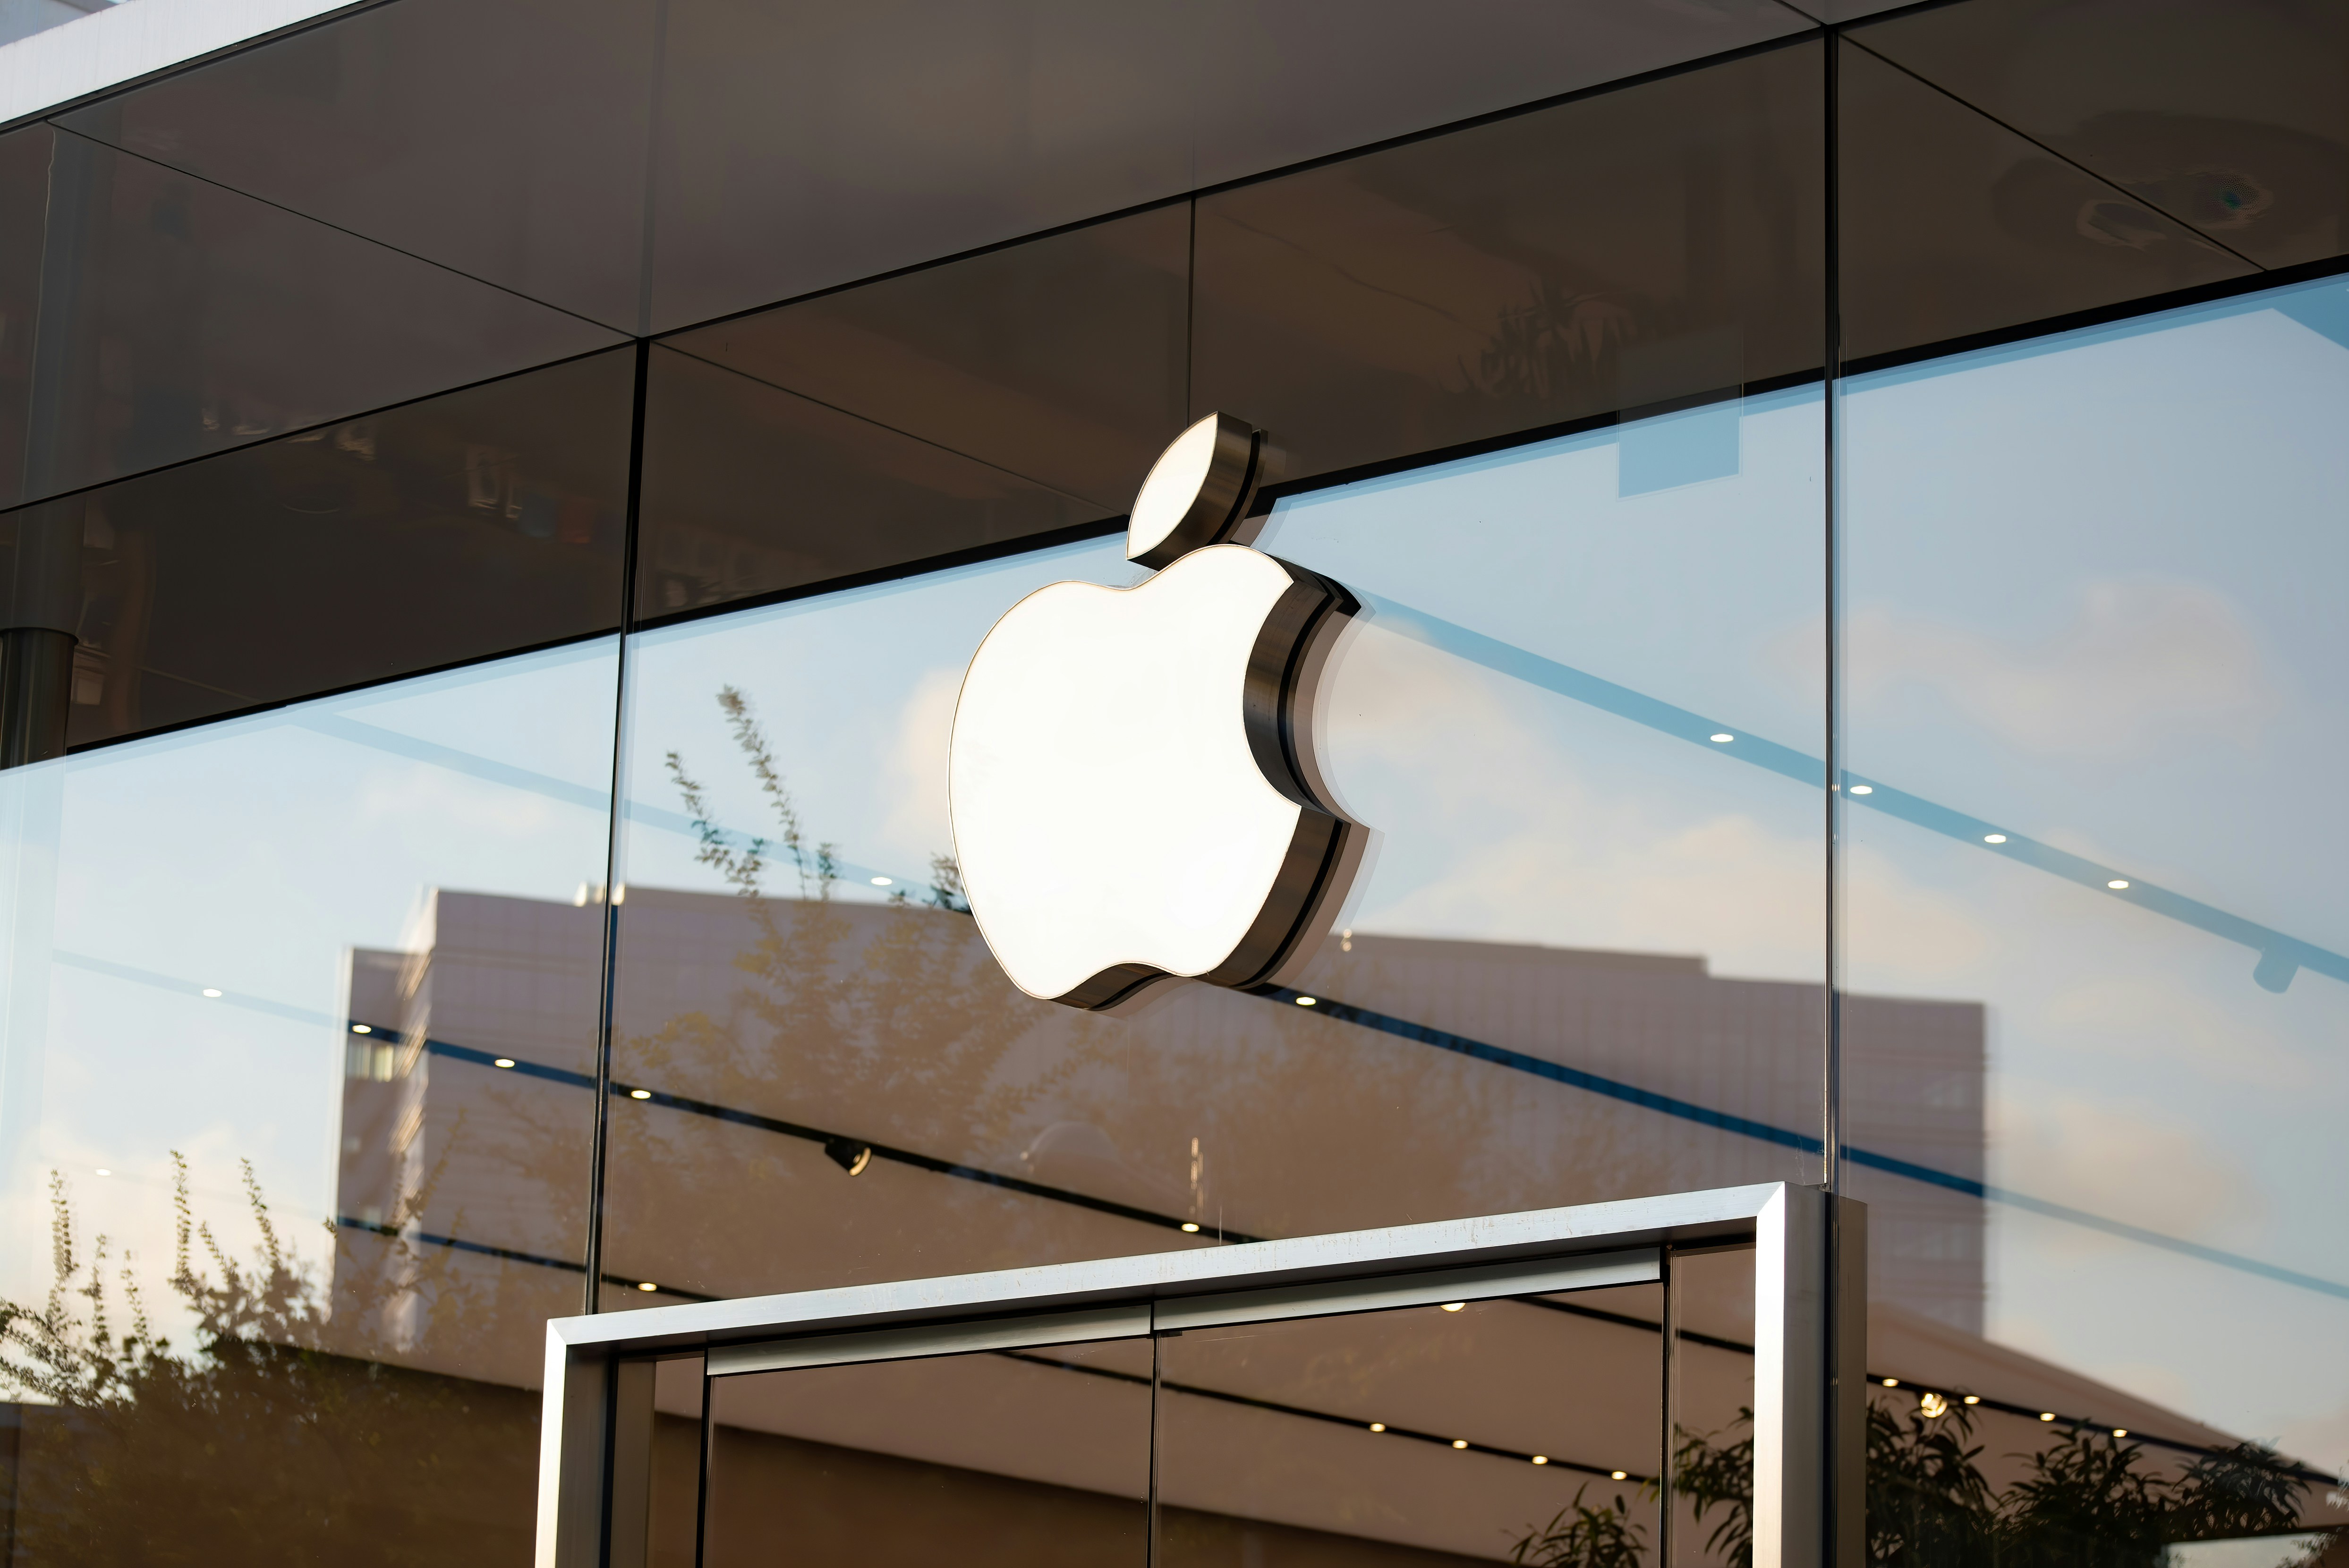 NYT: Apple intends to partner with news publishers to train its artificial intelligence